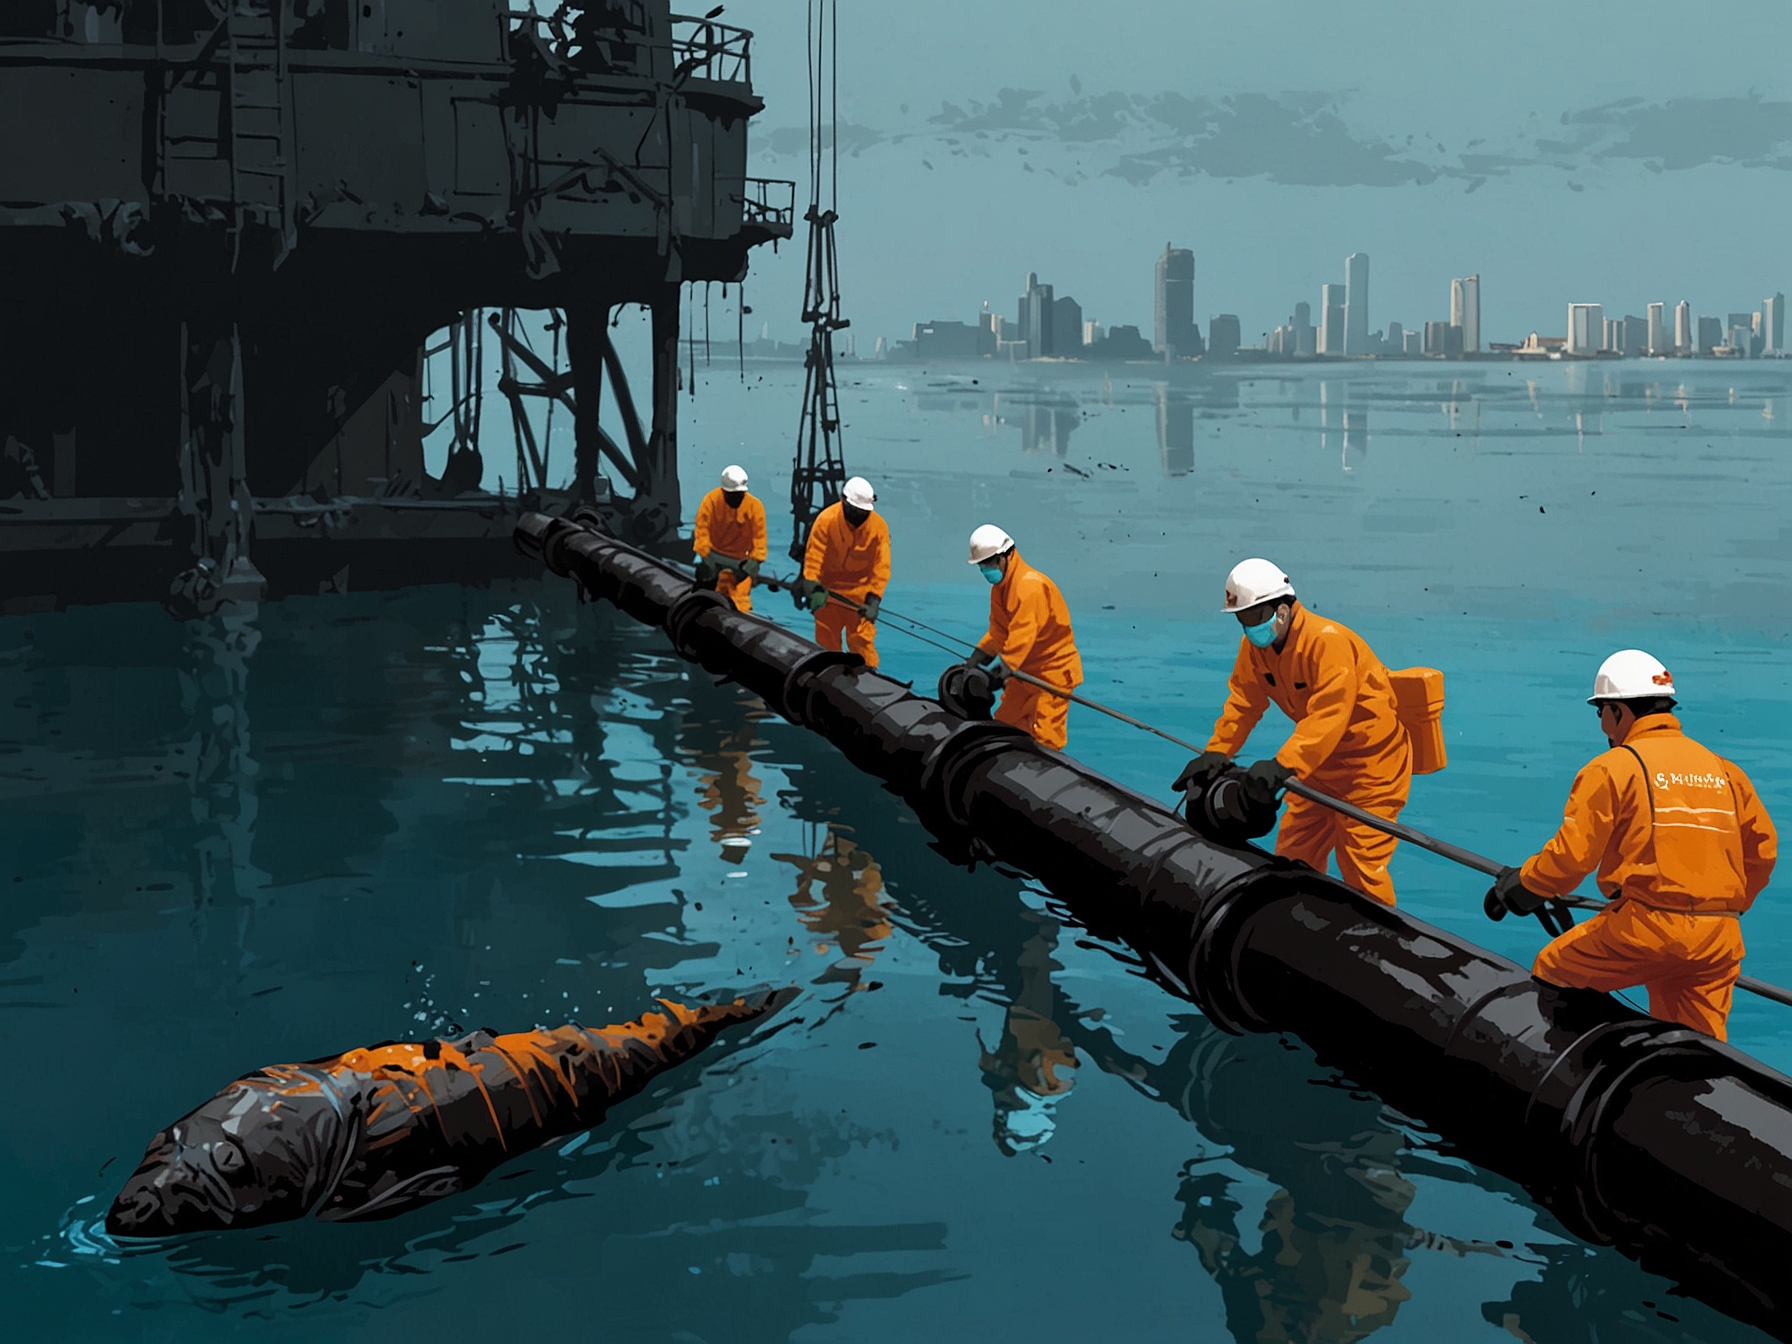 A depiction of a large-scale oil spill cleanup operation in Singapore, showing environmental workers using containment booms and skimmers to recover spilled oil and protect marine life.